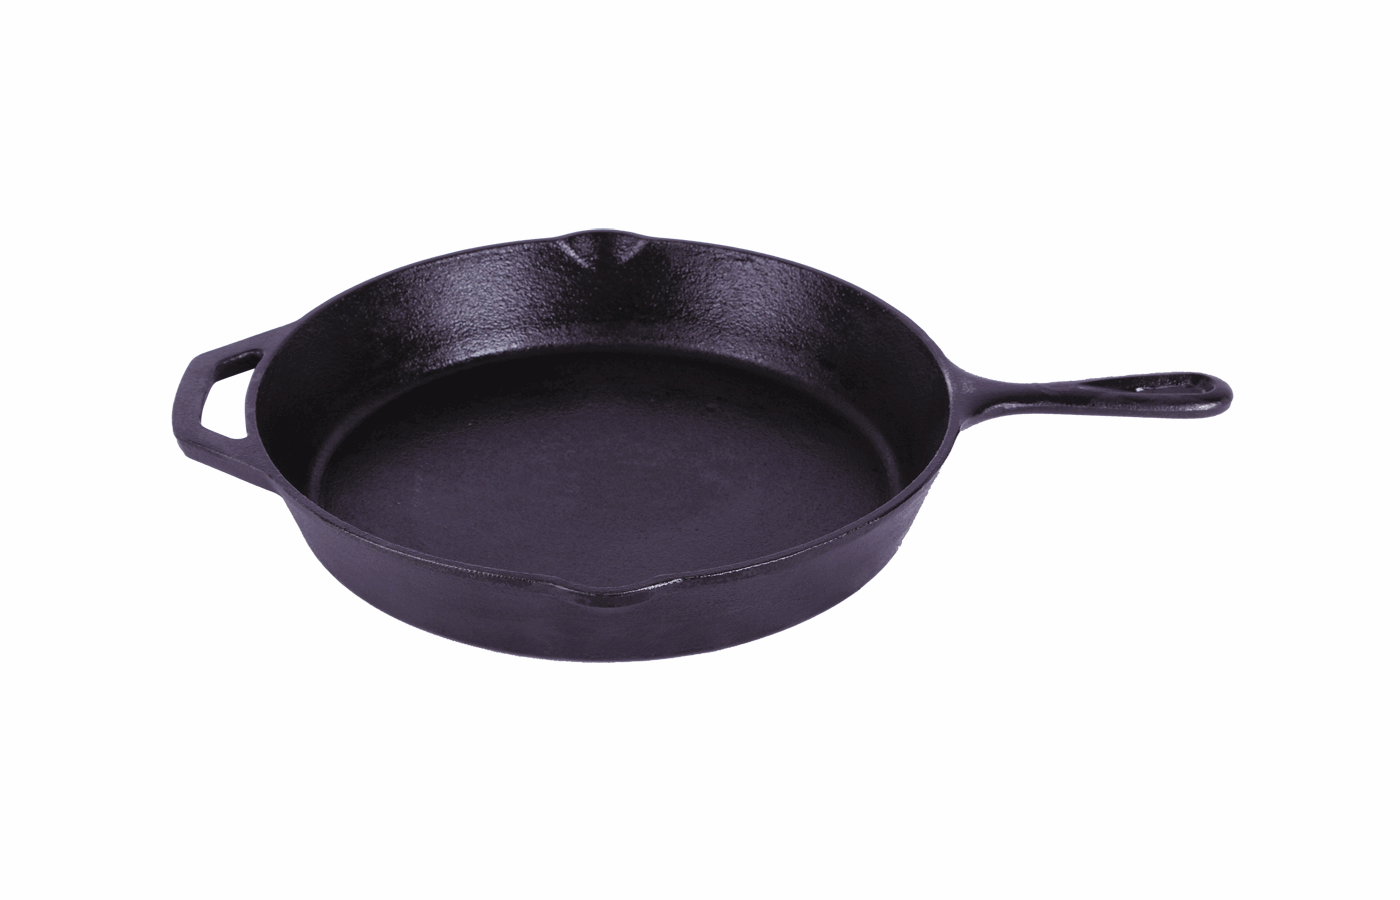 cast iron preseasoned fry pans classical style